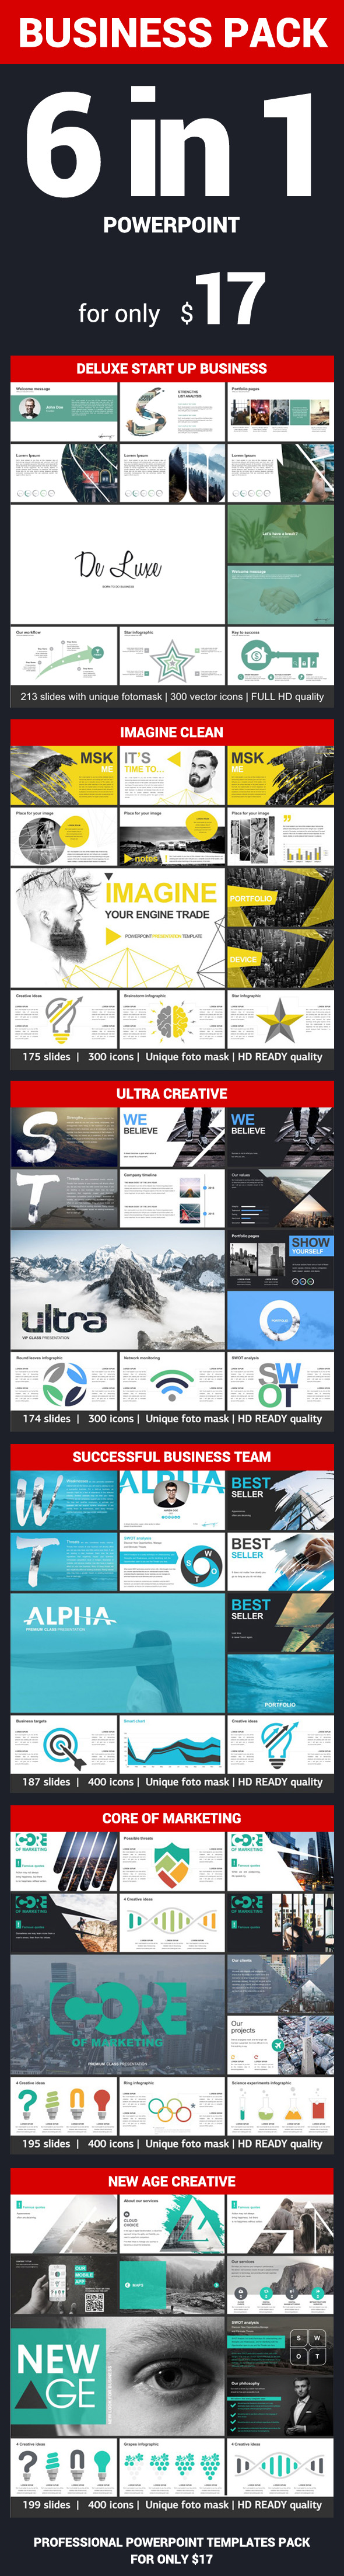 Business Pack Powerpoint